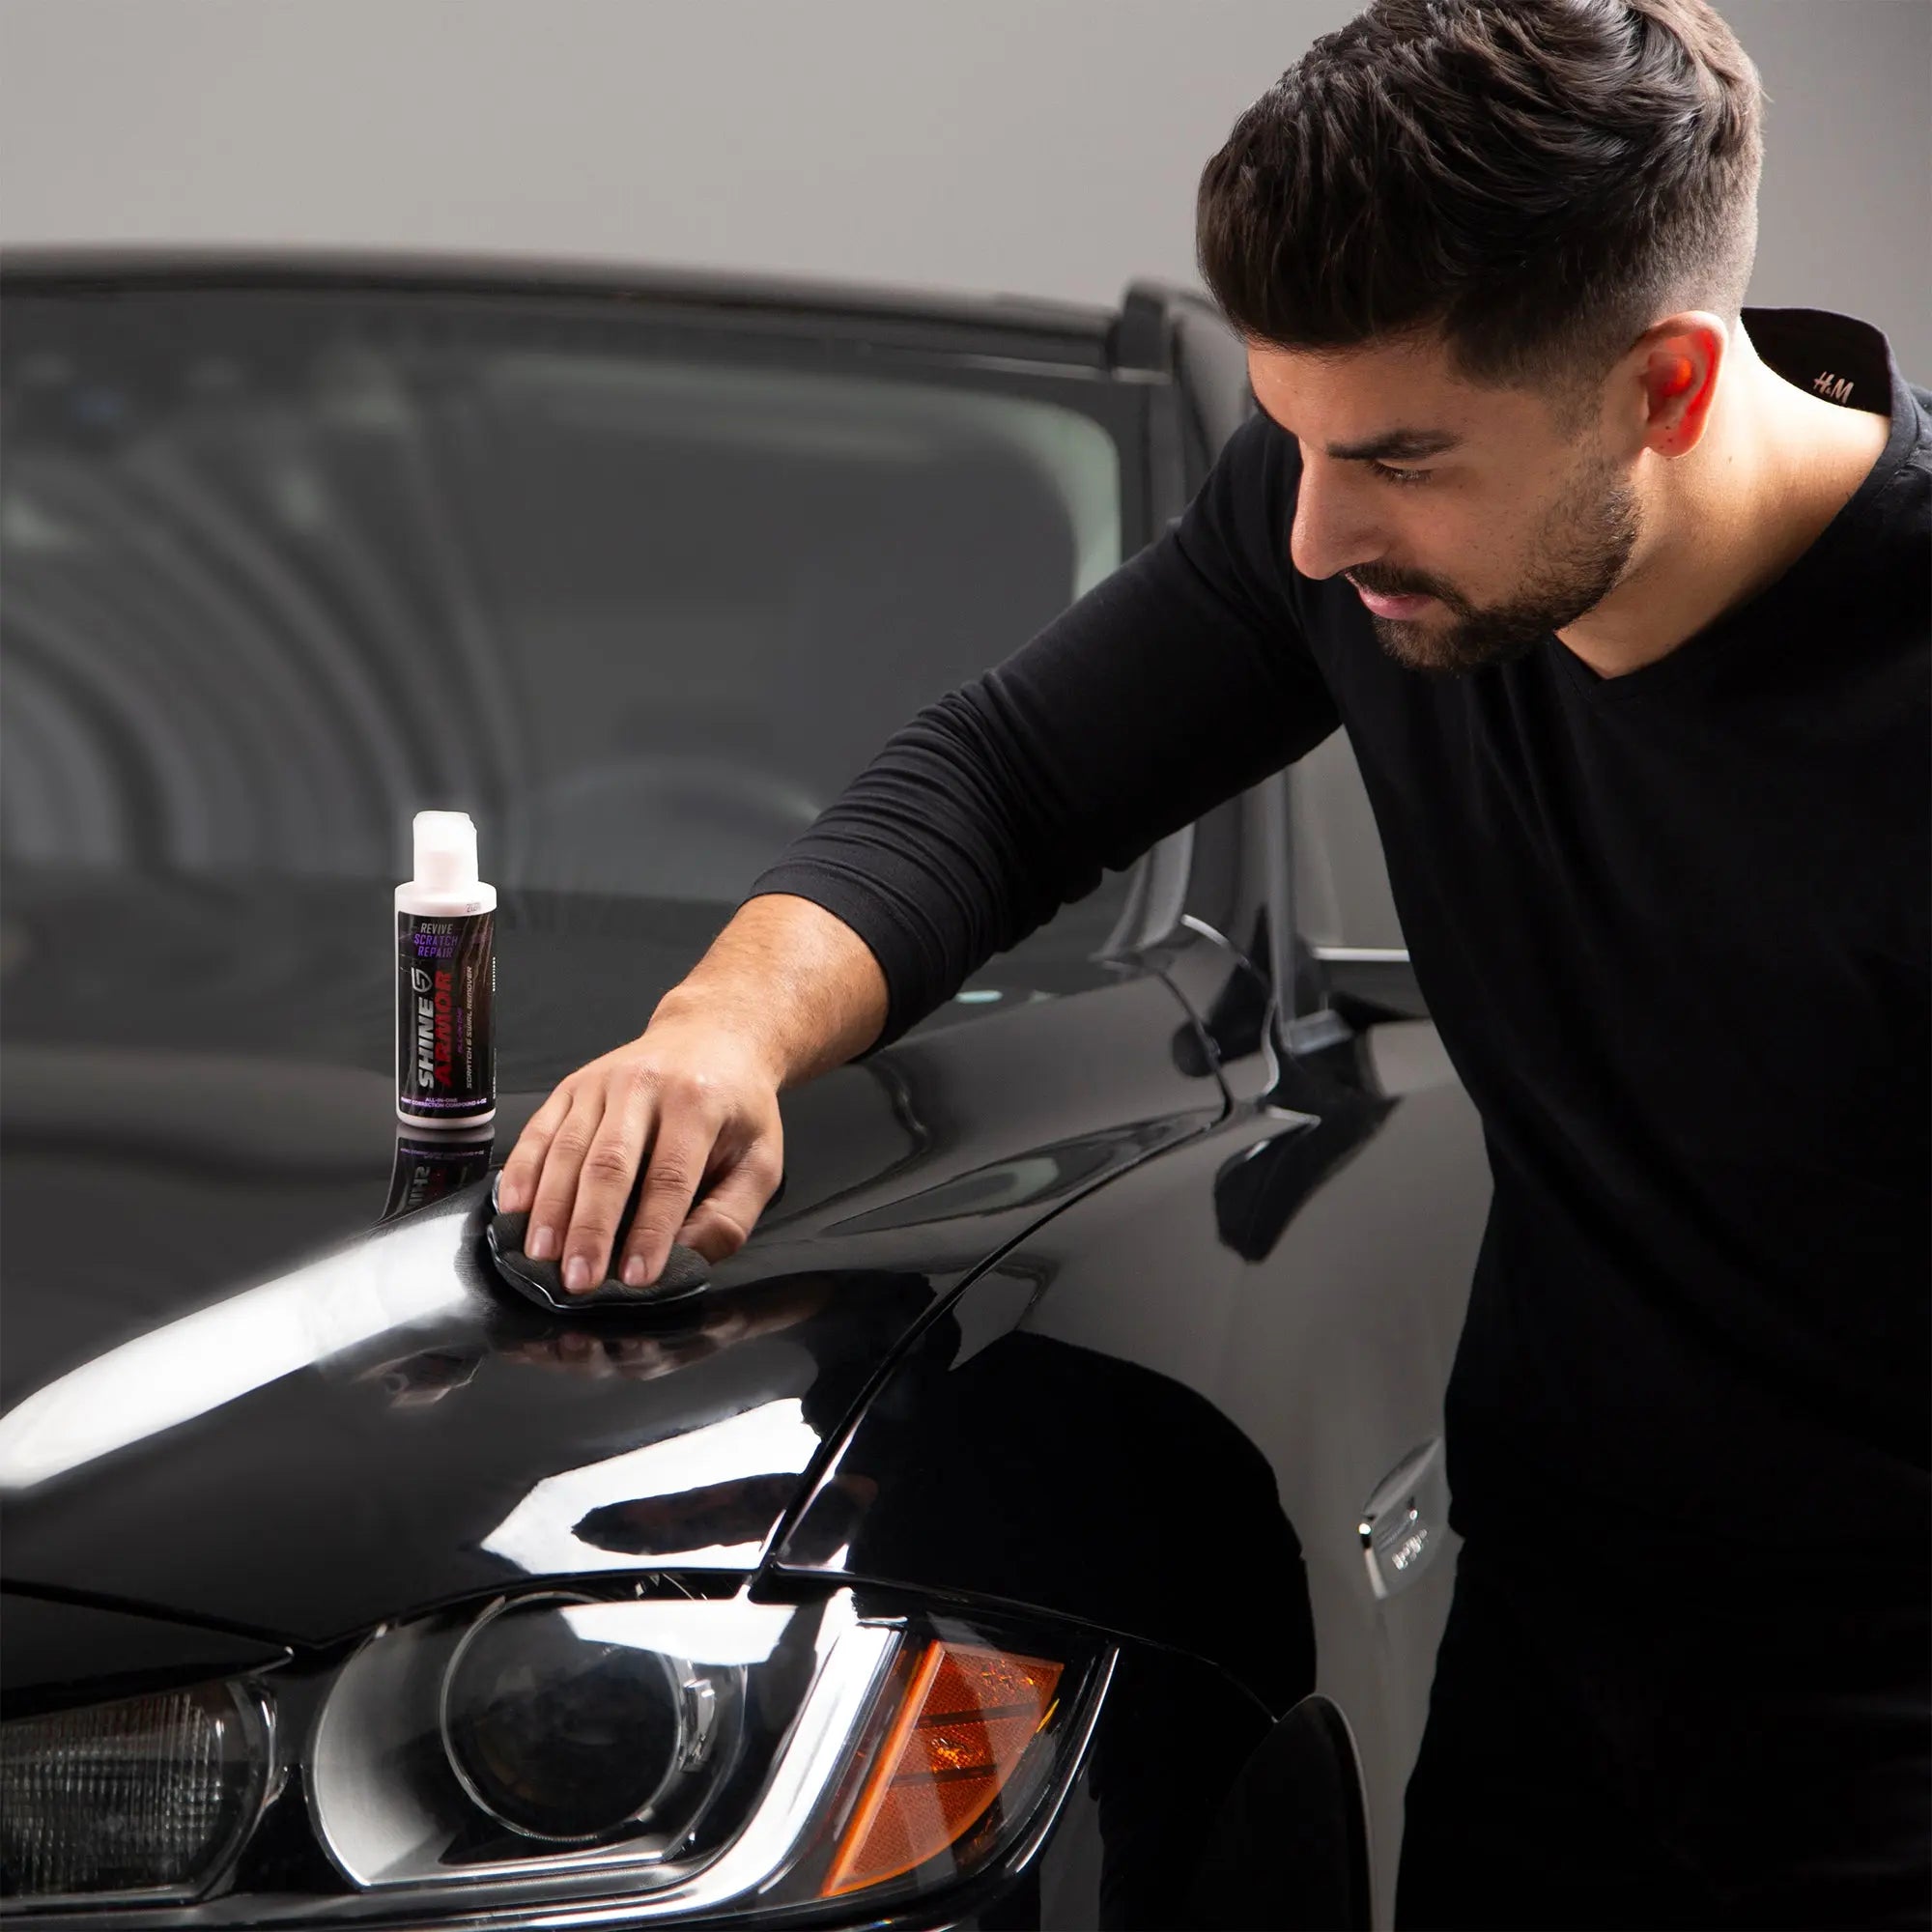 Make Your Car Look Brand New - Shine Armor Scratch Repair